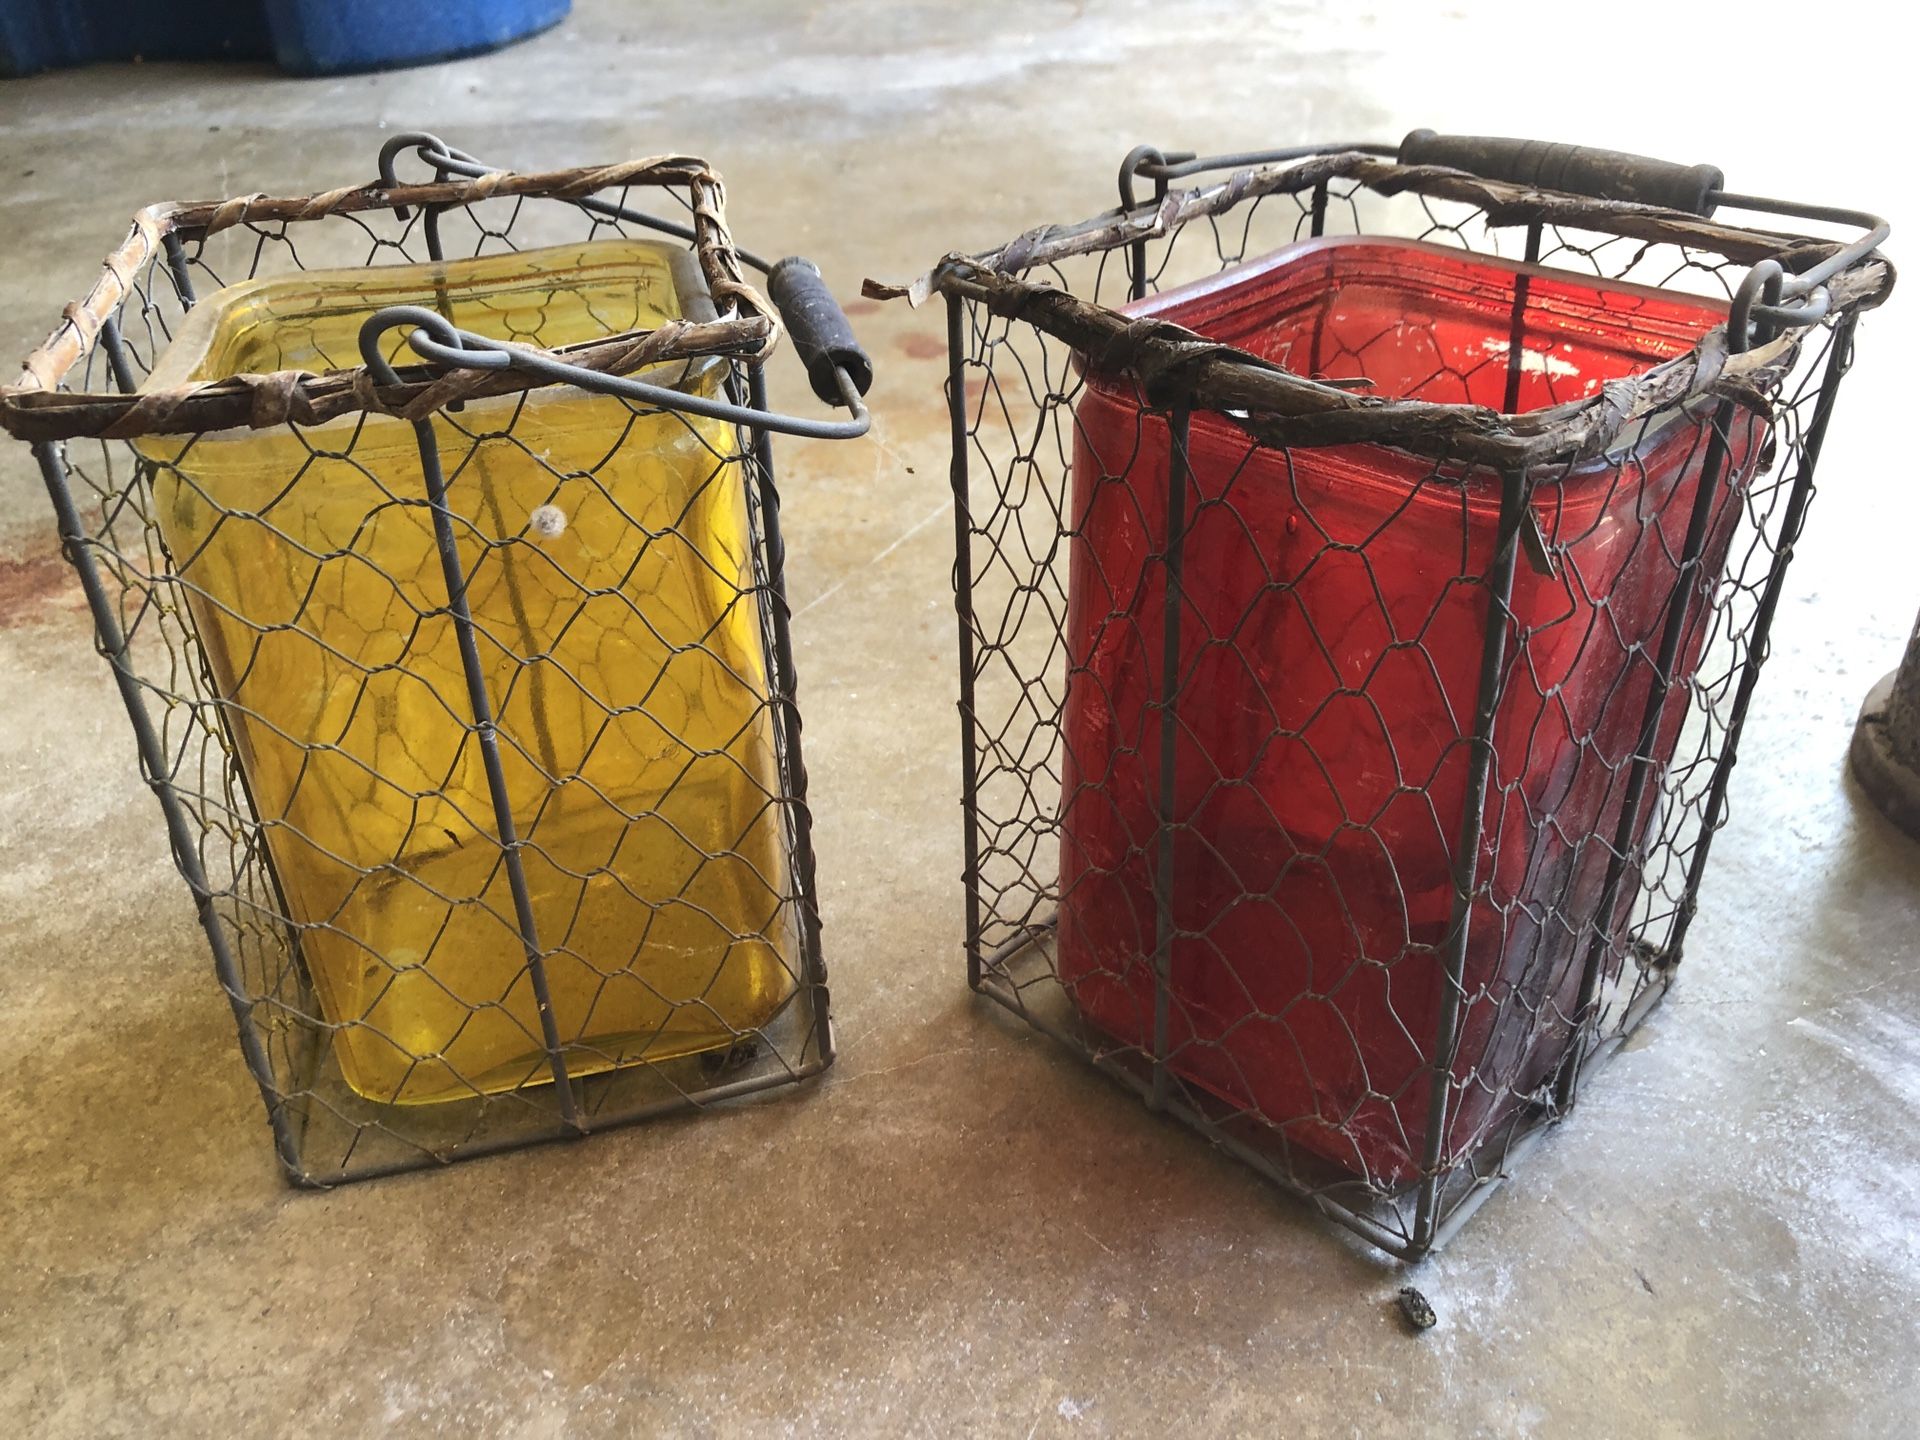 Outdoor candle holders approx 12” tall